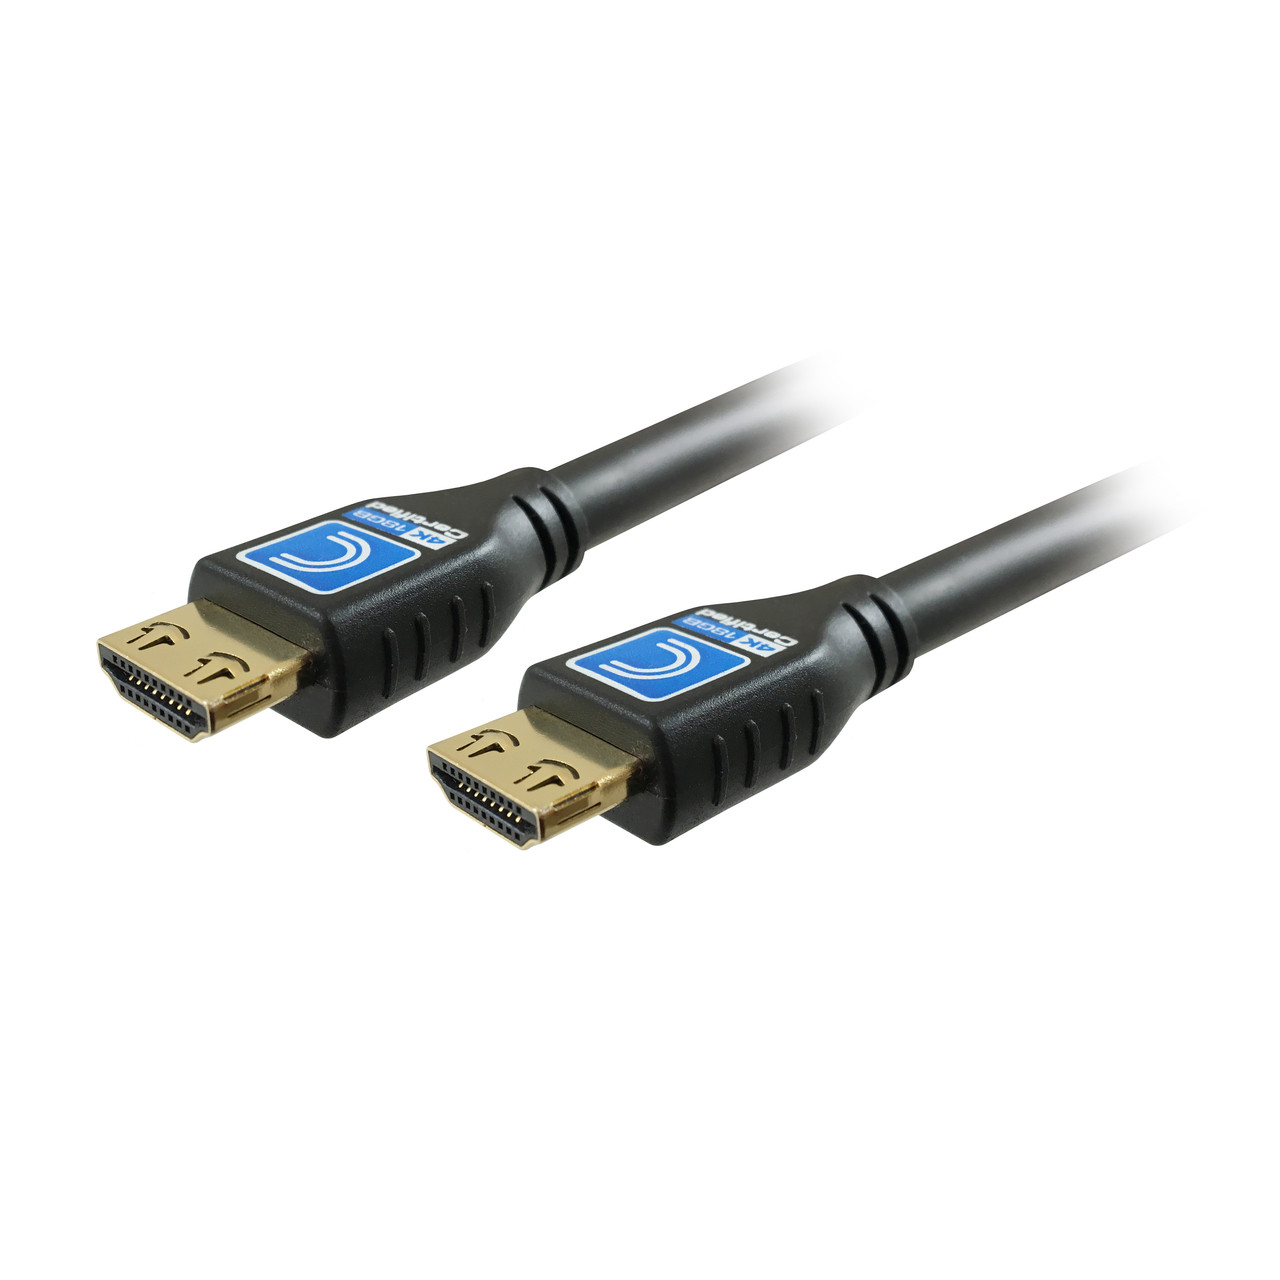 HDMI Cables - 4K & High Speed HDMI Cables